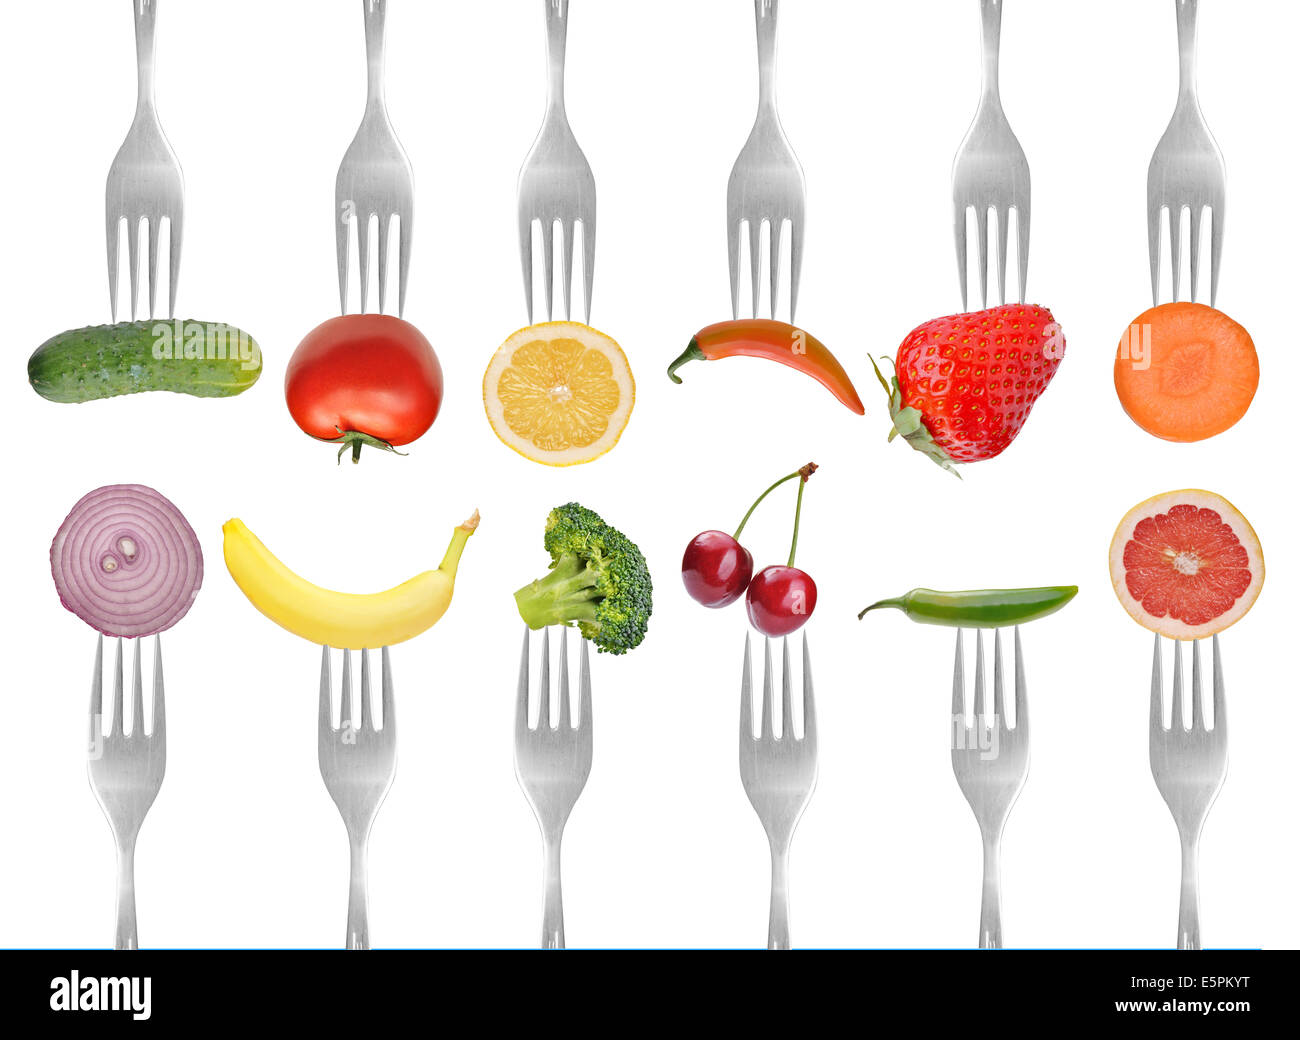 vegetables and fruits on the collection of forks, diet concept Stock Photo